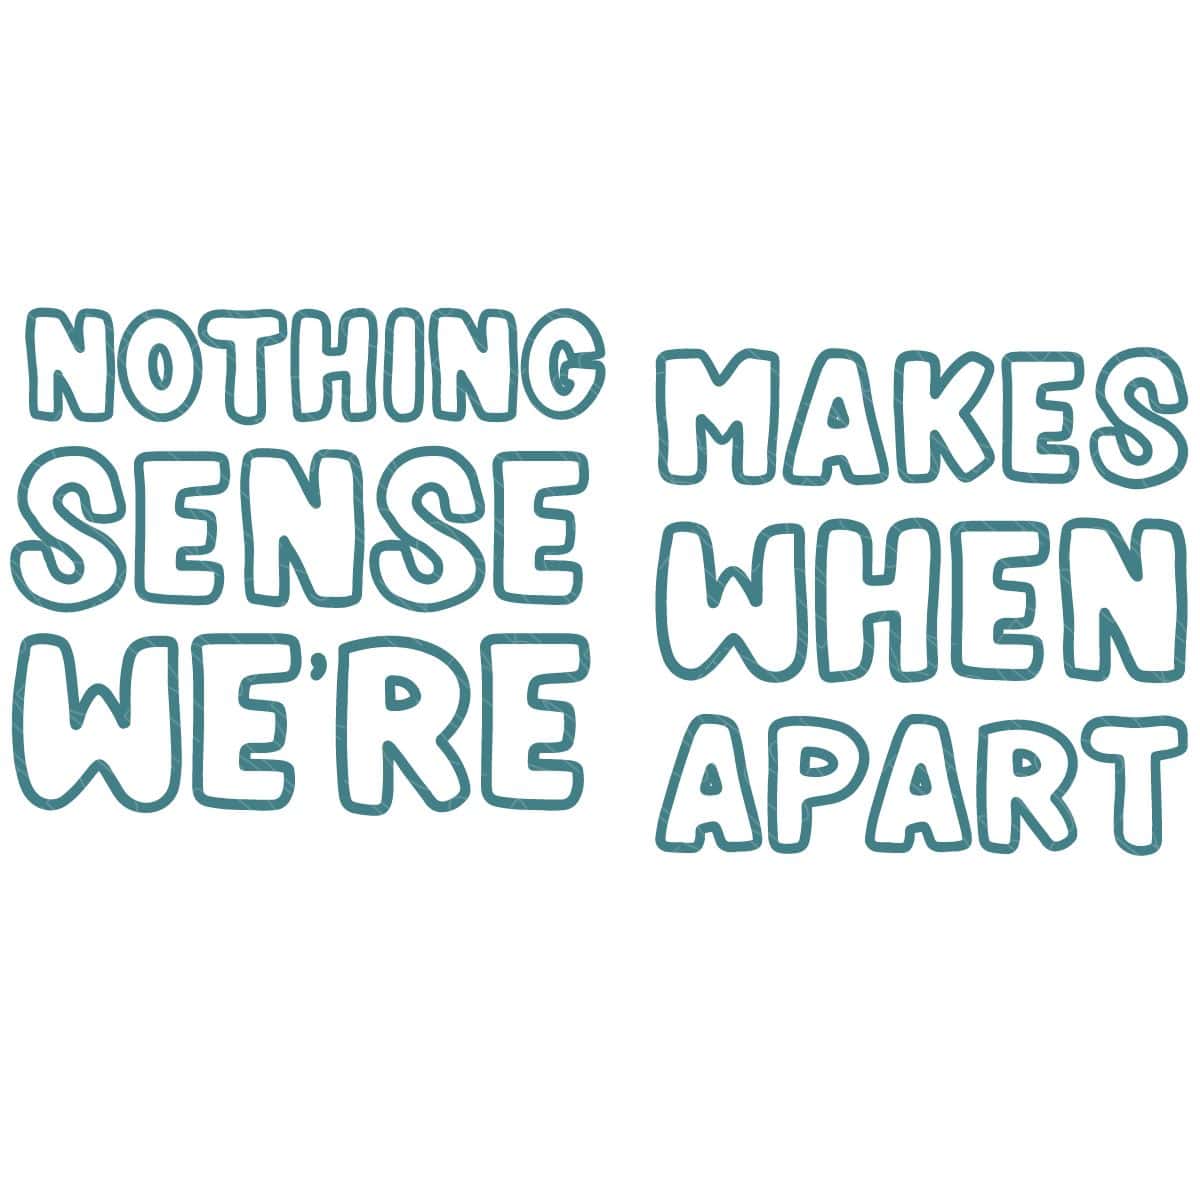 Nothing Makes Sense When We're Apart SVG	

		
		
			$2.50 – Buy Now Checkout
							
					
						
							
						
						Added to cart